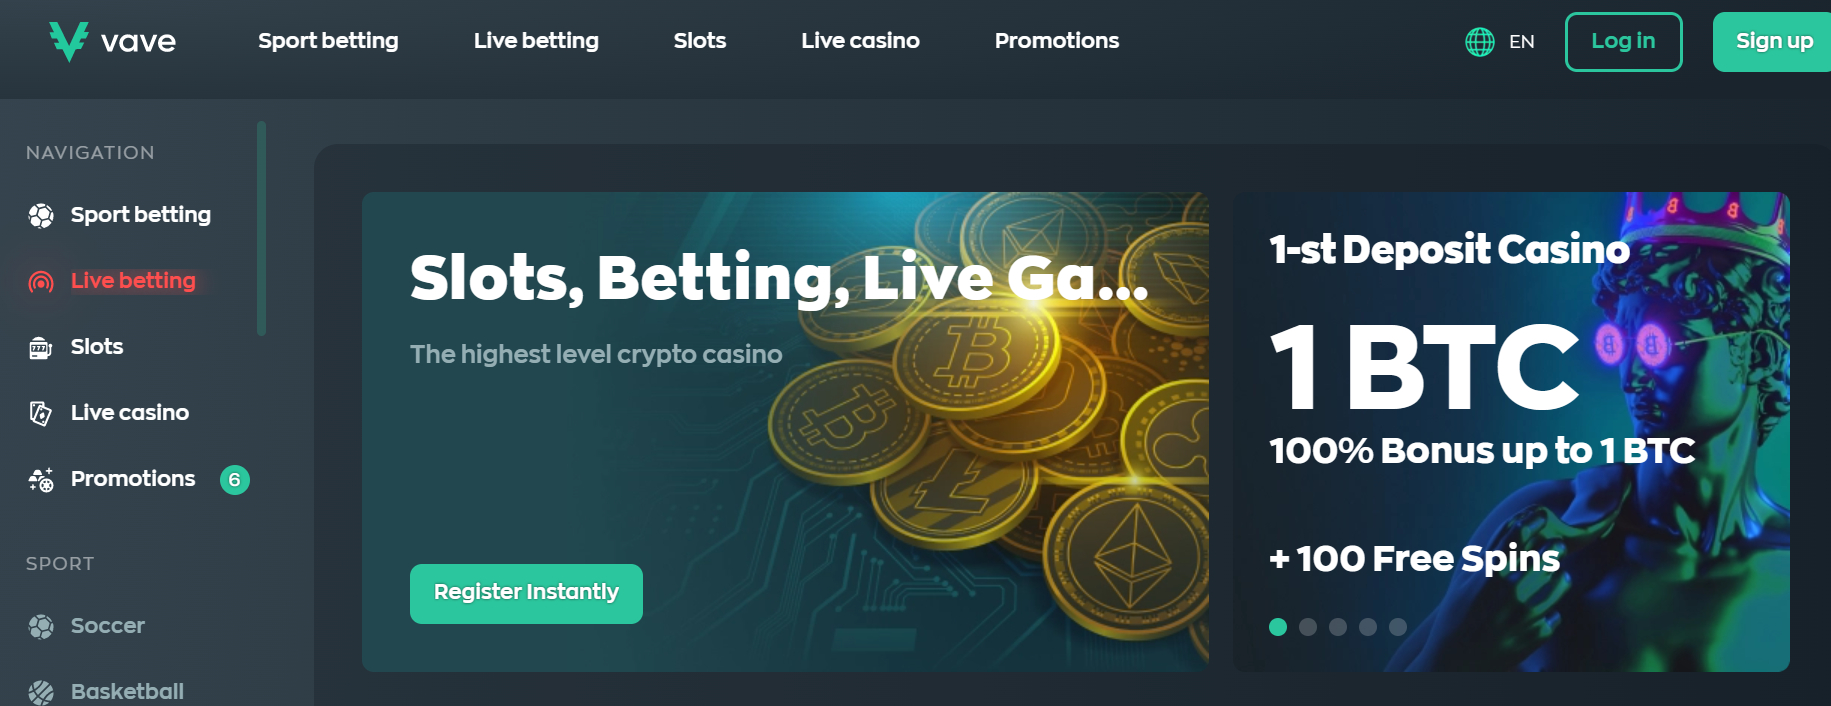 vave casino home page with options to choose from